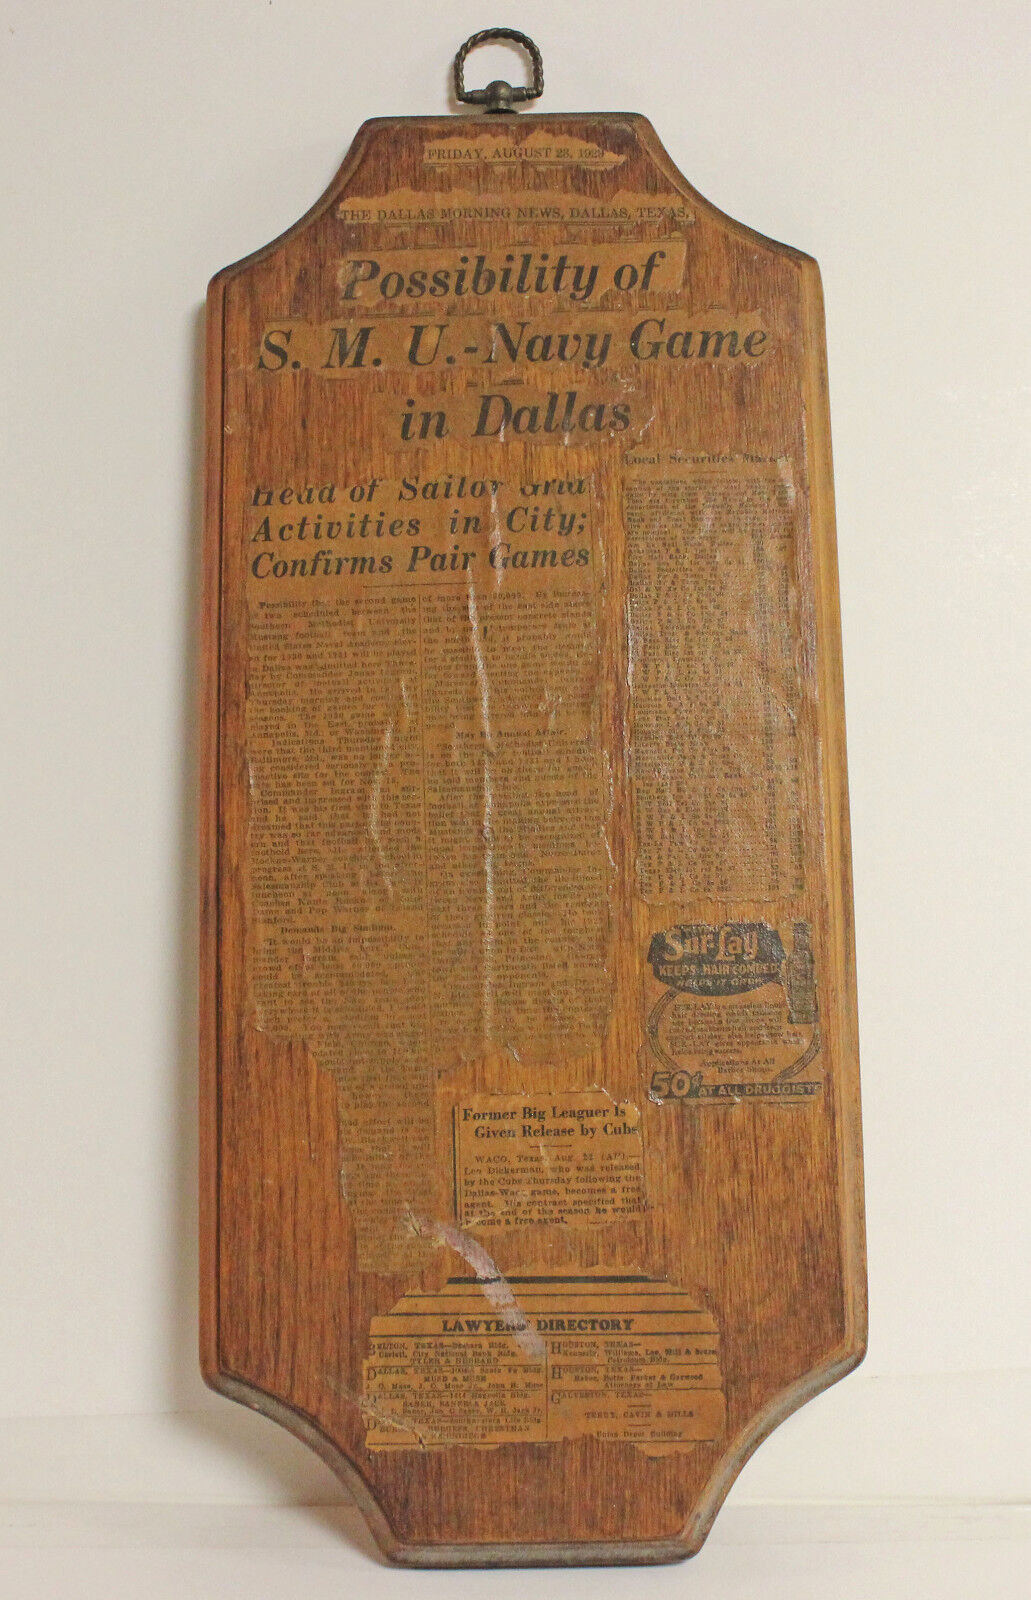 VINTAGE Plaque SMU Navy Game in Dallas DALLAS MORNING NEWS August 23 1929